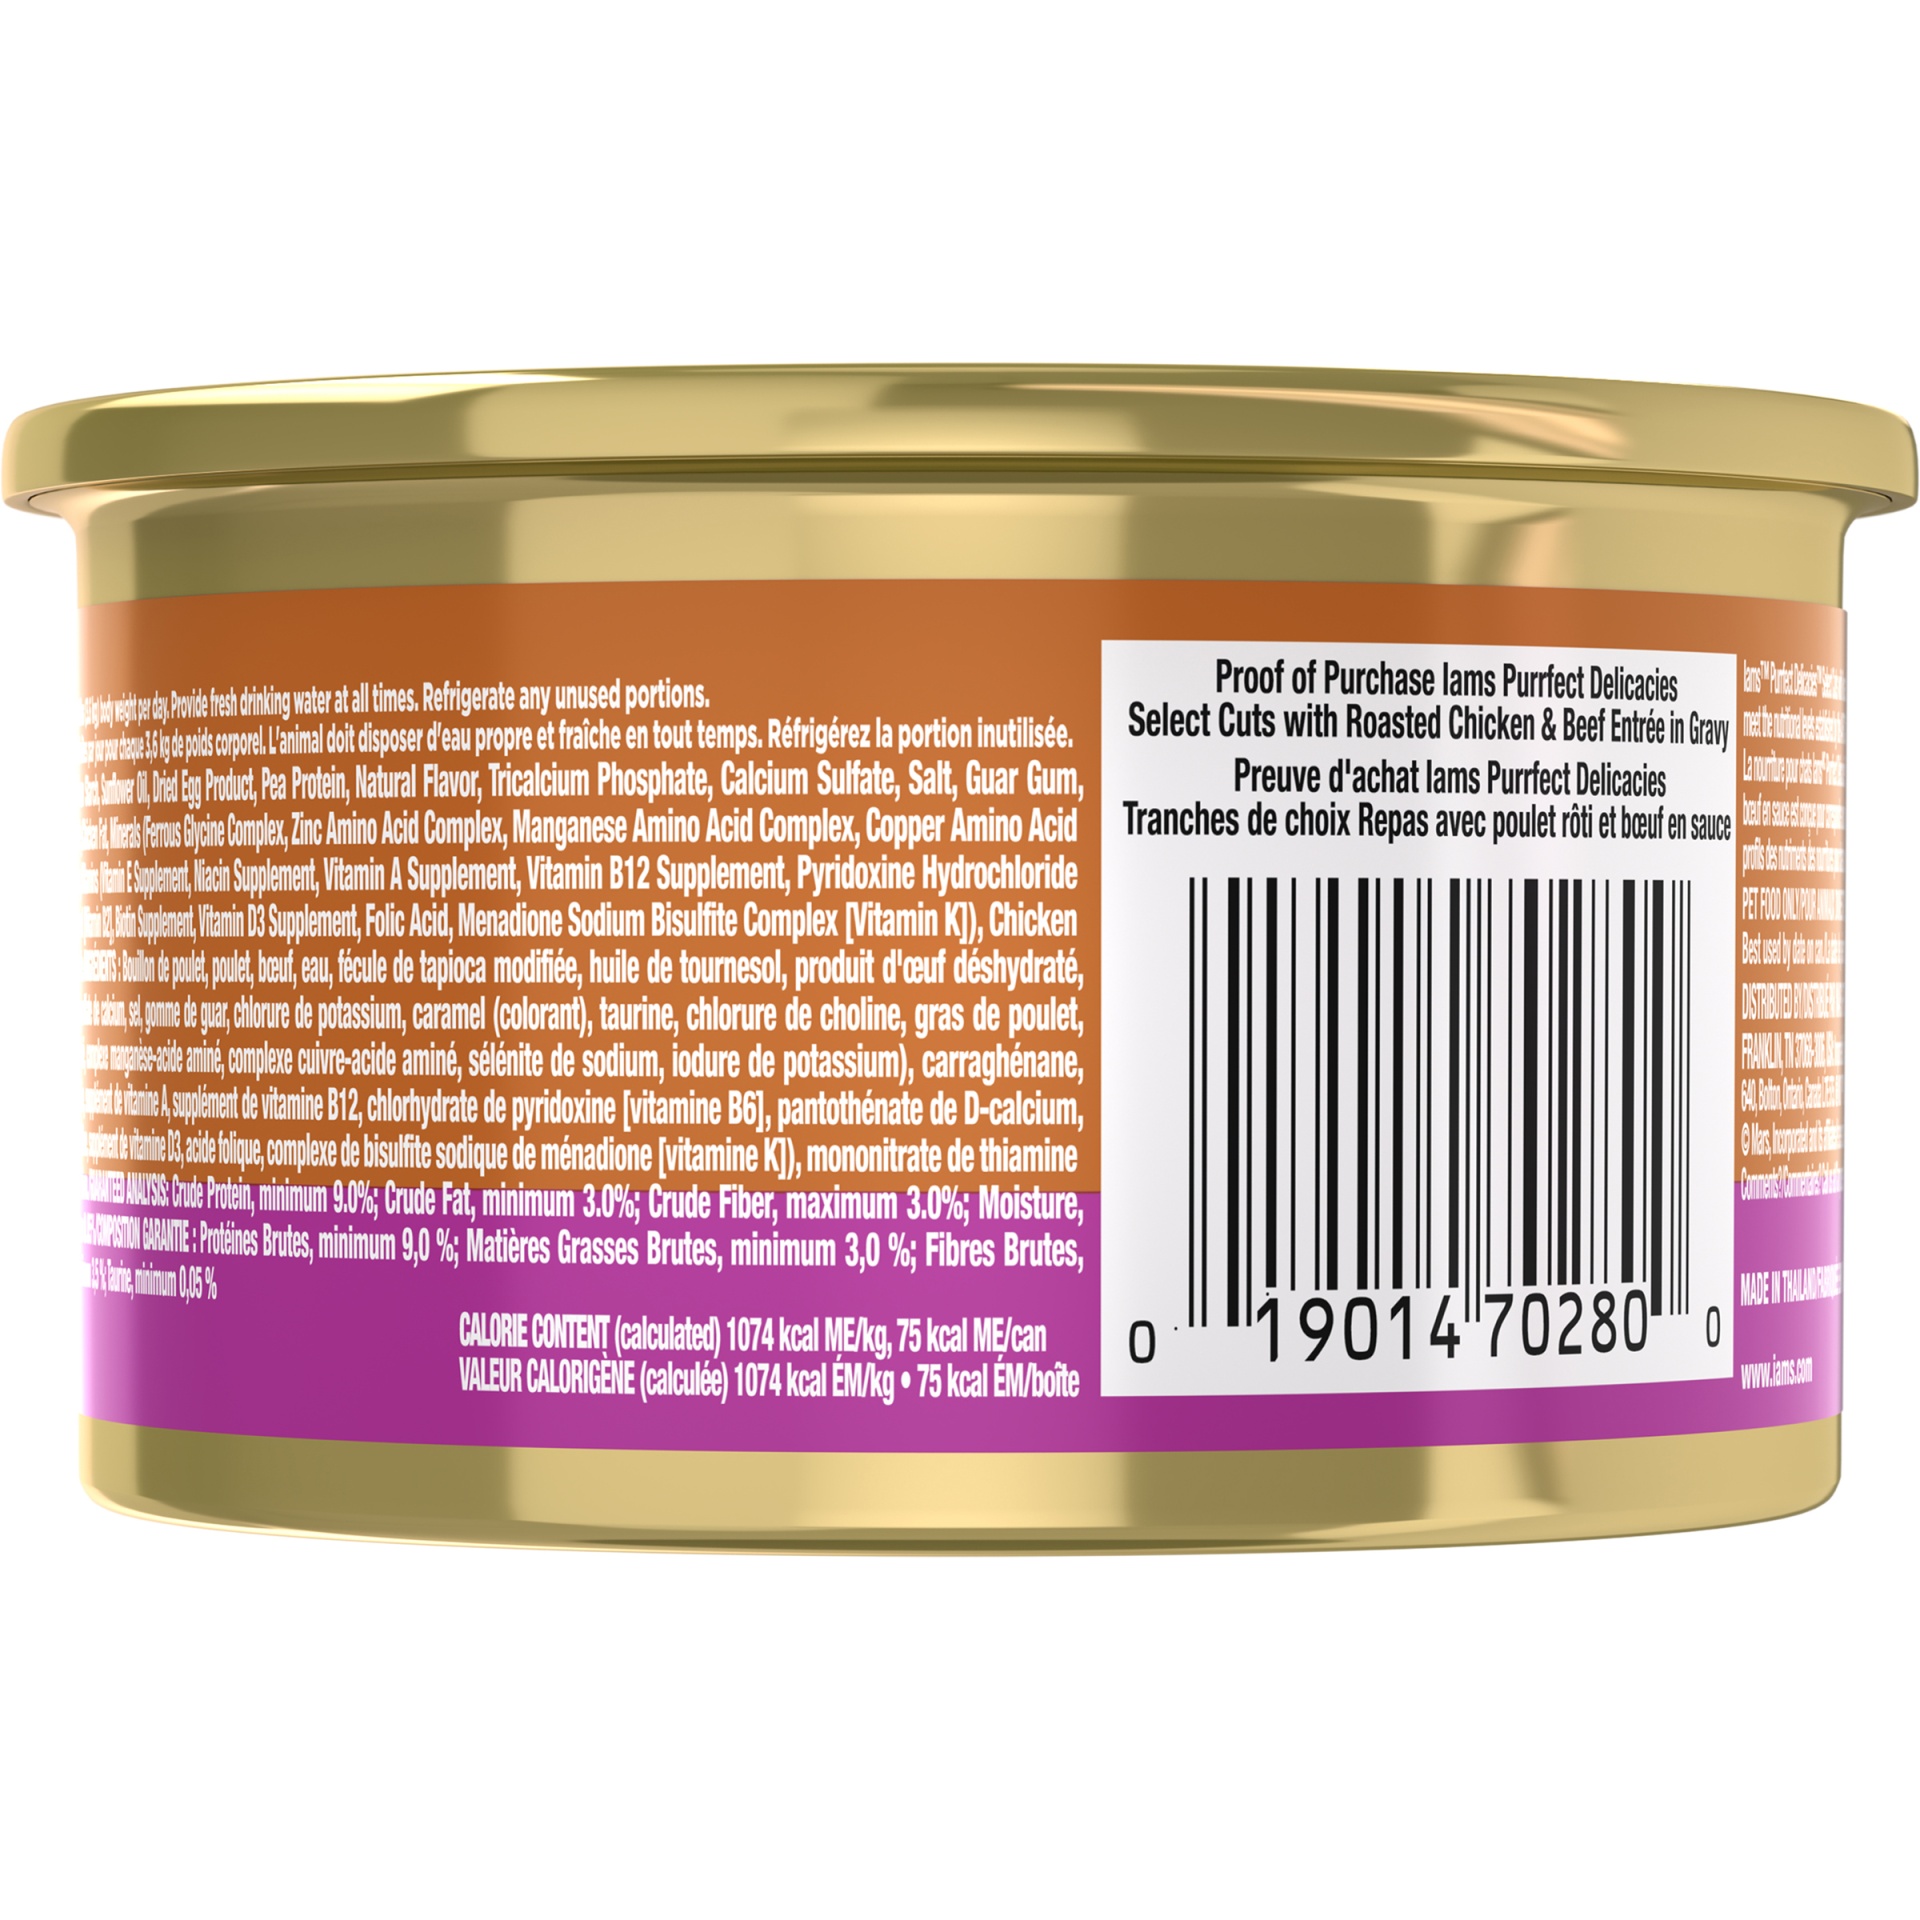 slide 4 of 7, IAMS Purrfect Delicacies Select Cuts With Roasted Chicken & Beef Entre In Gravy, 2.47 oz